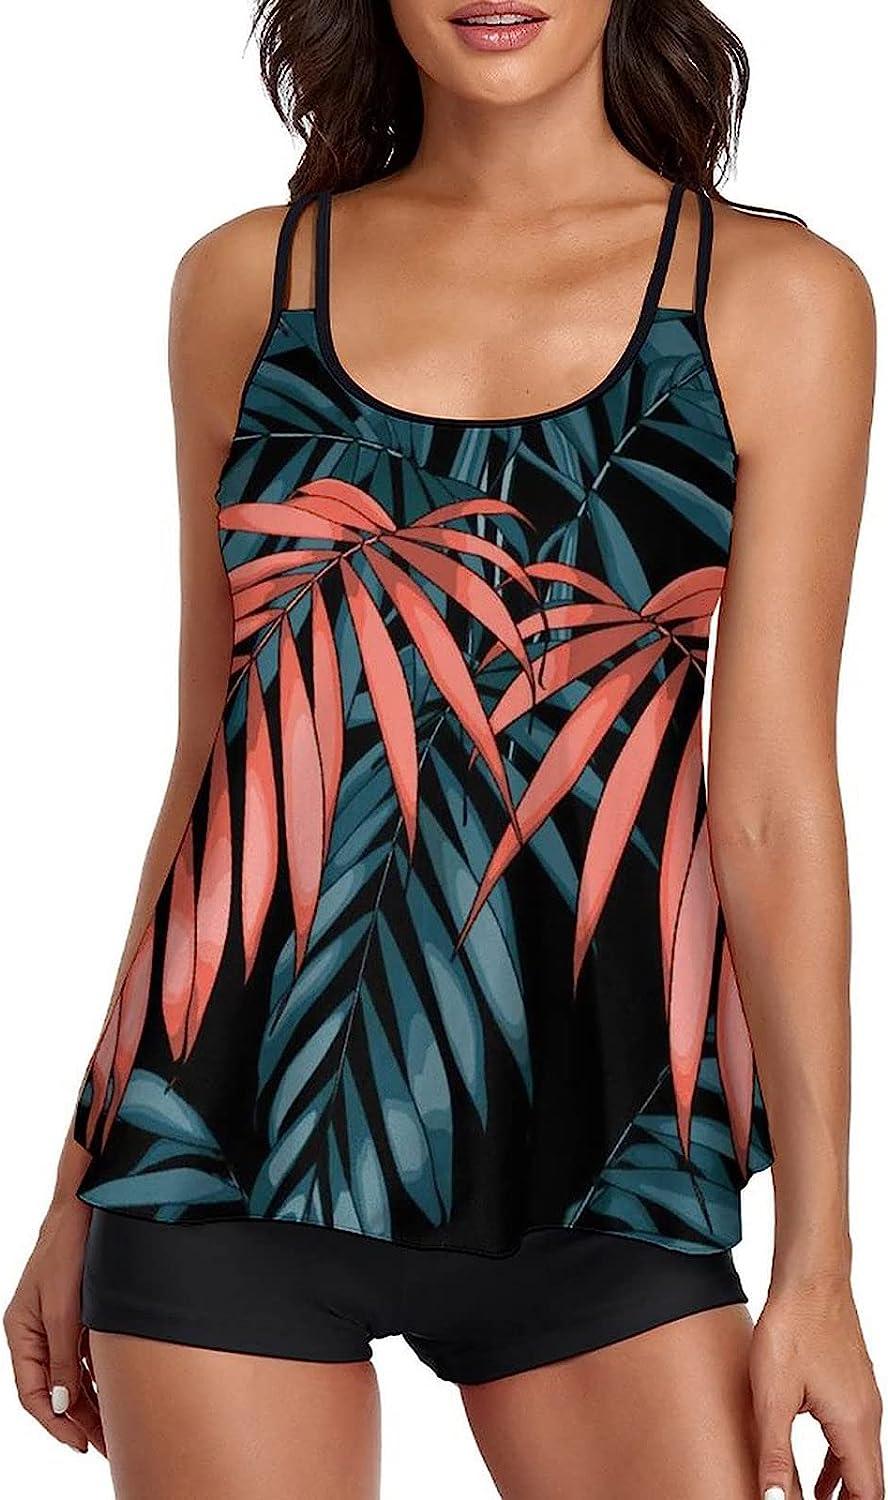 Tankini Swimsuits for Women Floral Printed Tank Top Modest Loose